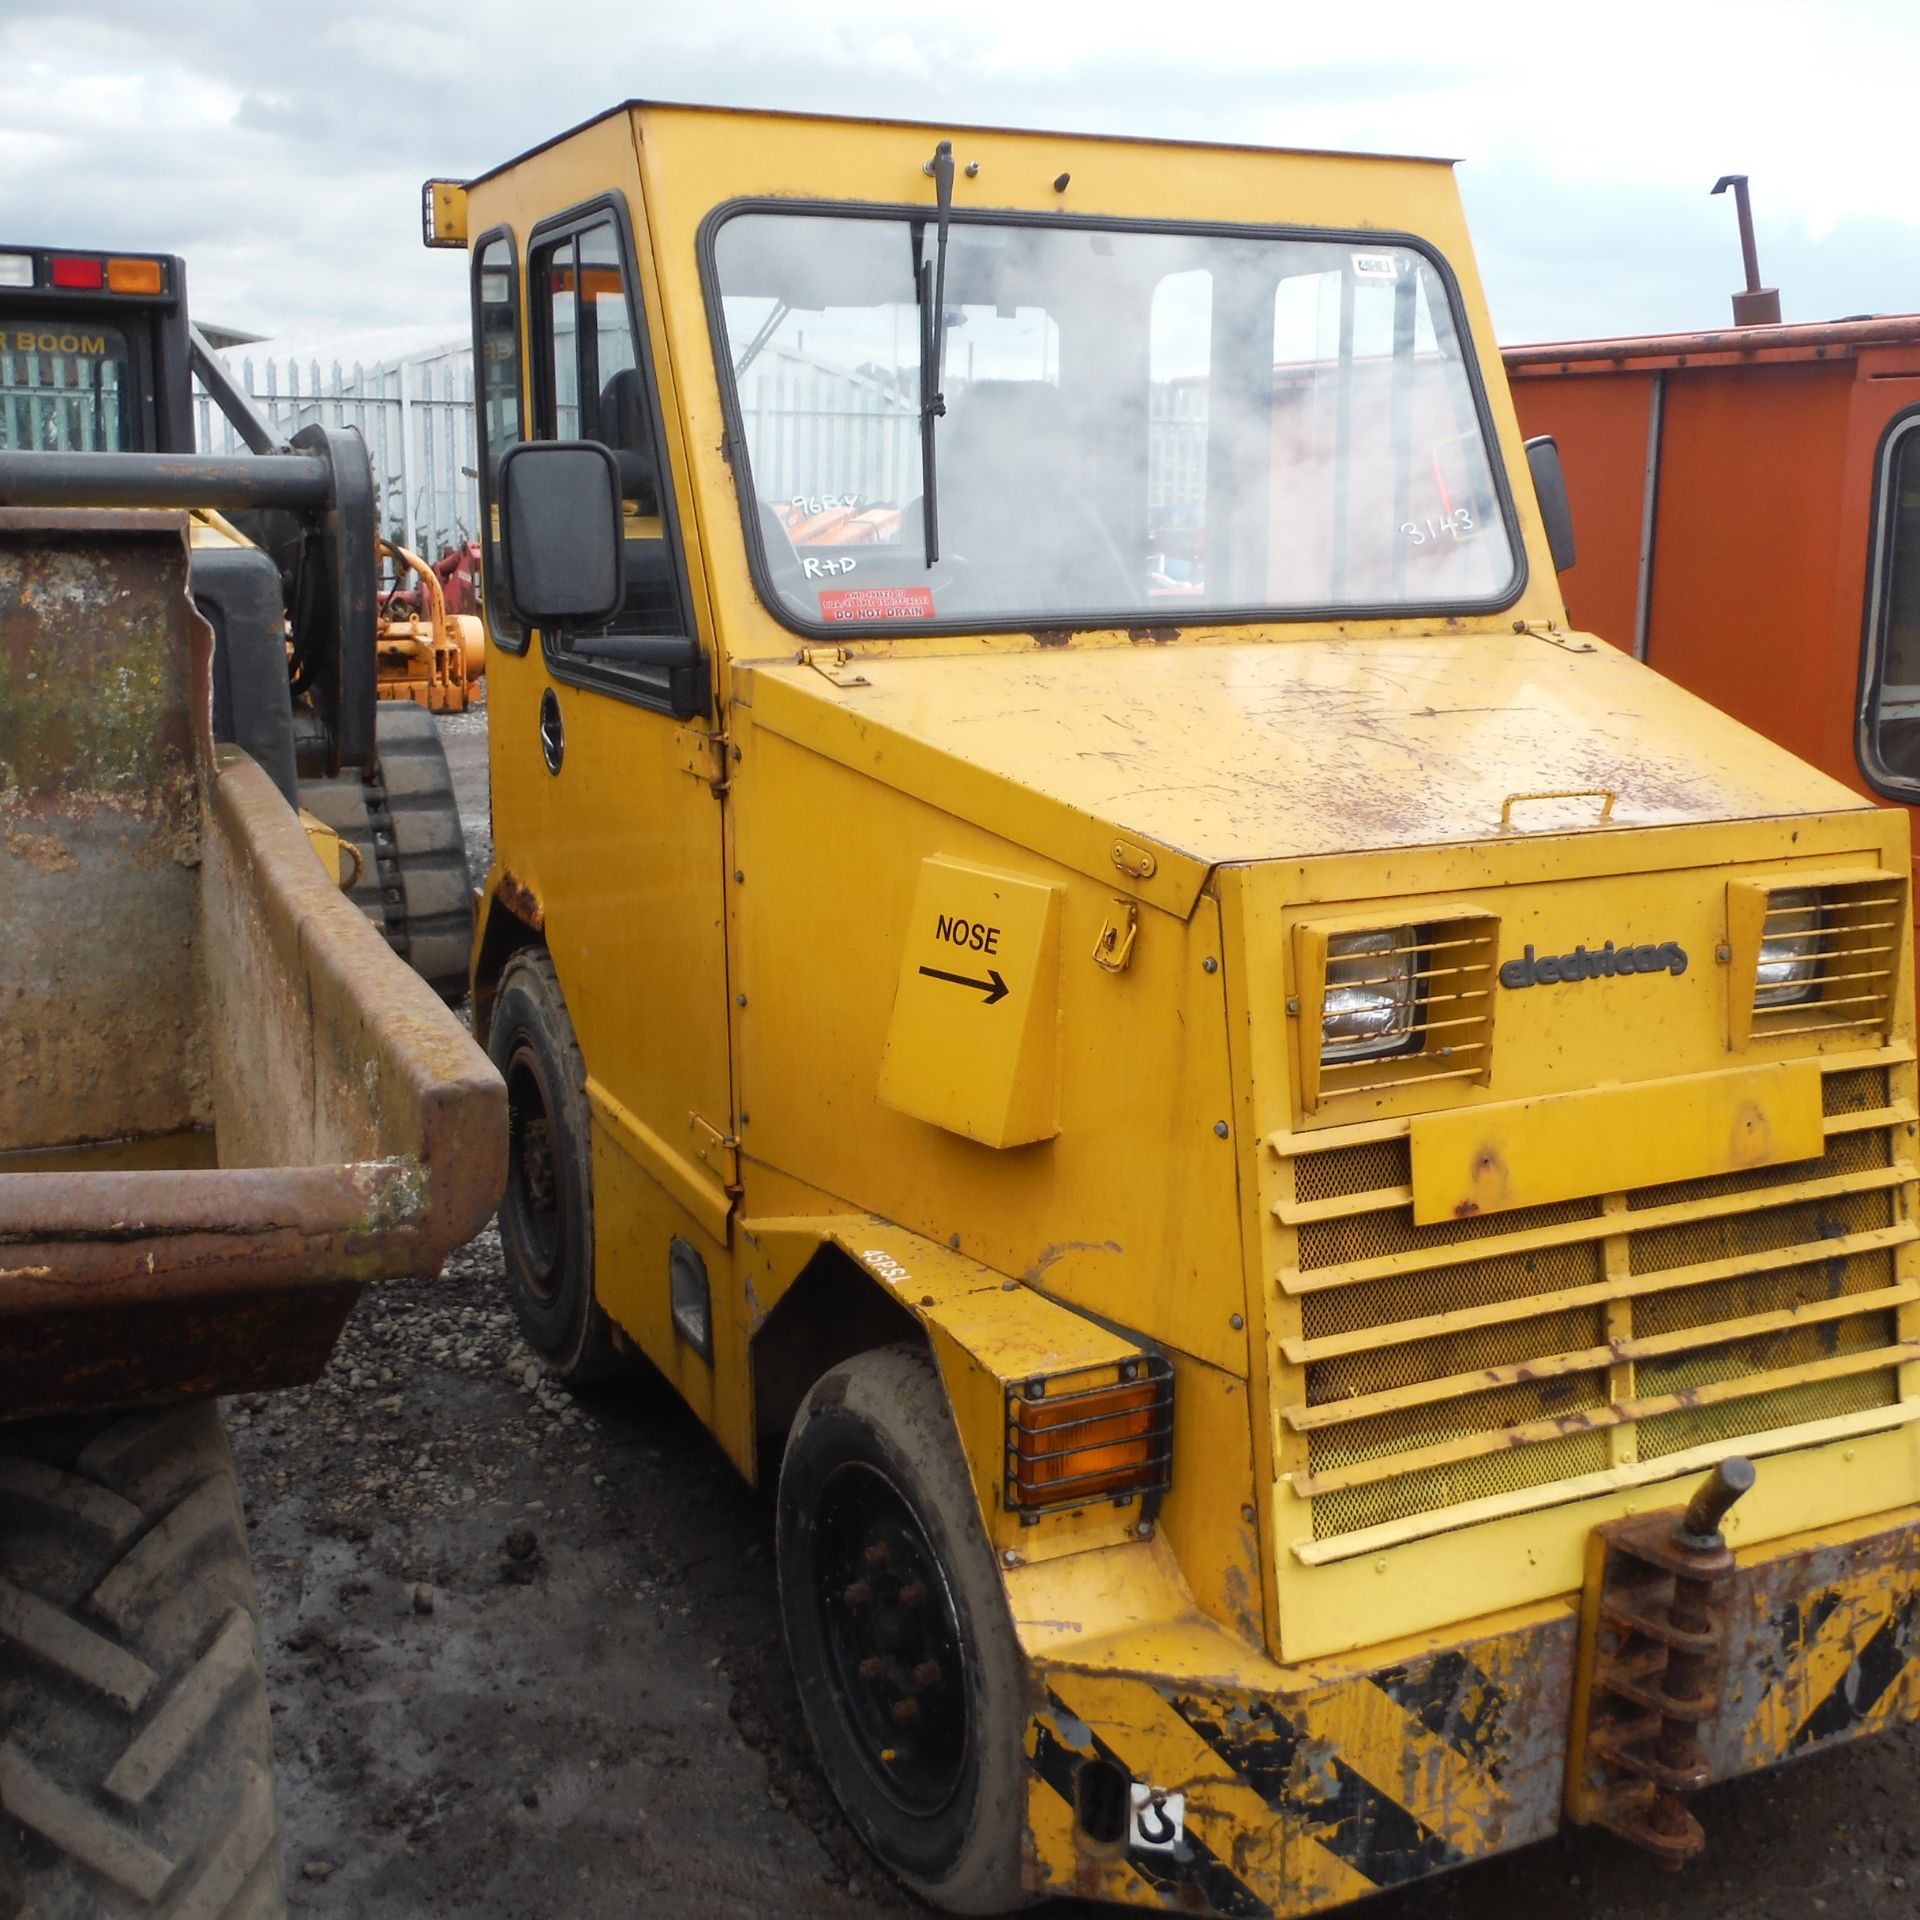 ELECTRICARS 2.5ltr FORD diesel driven yard tug - Image 2 of 2